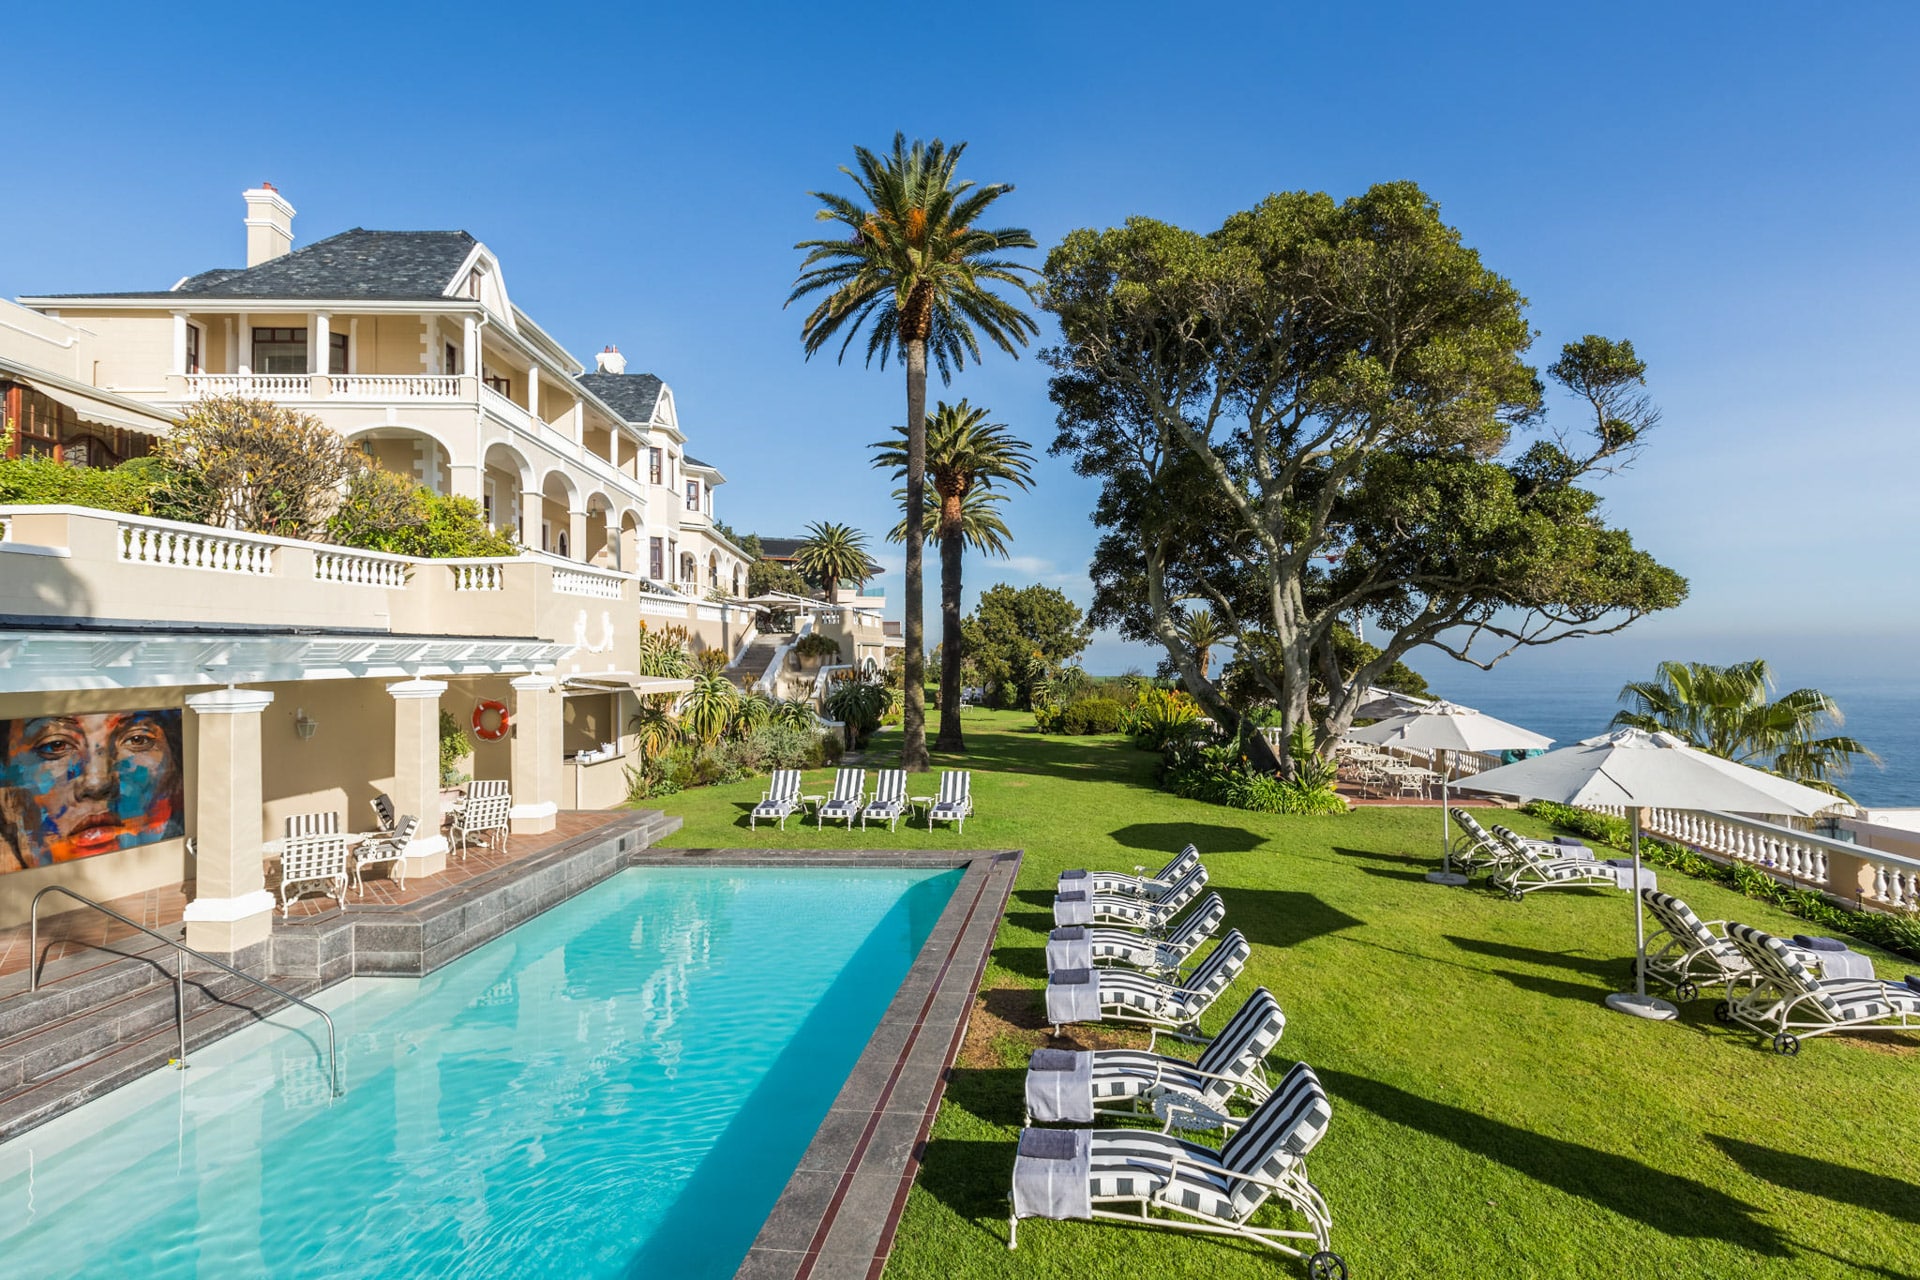 The main pool at Ellerman House - a perfect place to spend Christmas in South Africa.